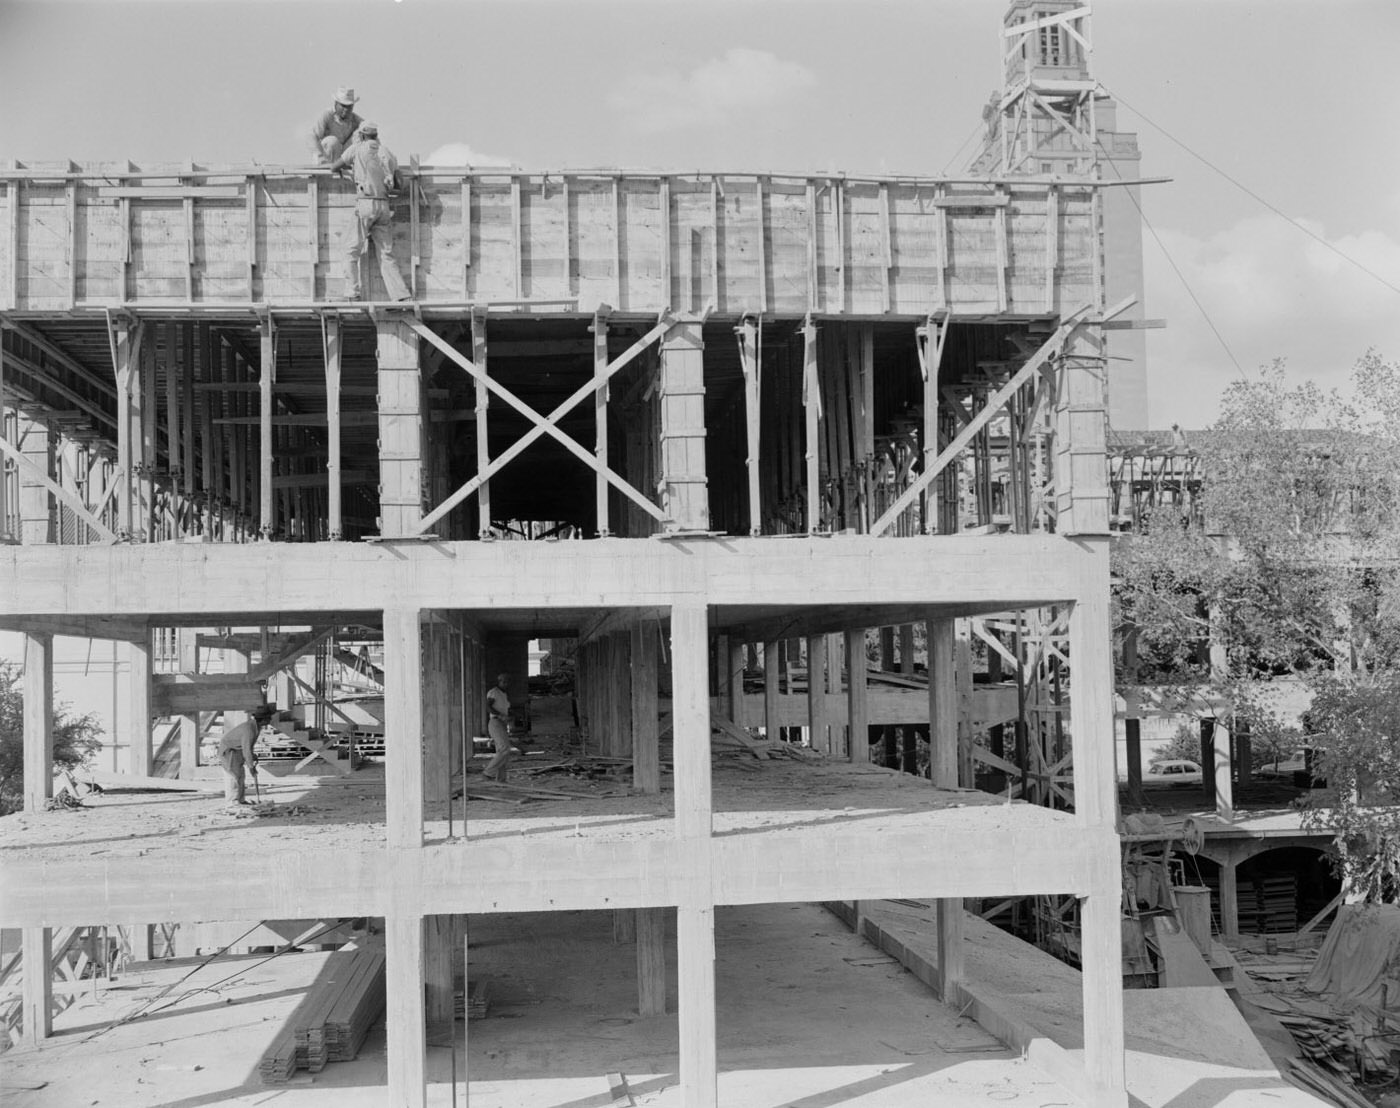 University of Texas, Construction Workers on Building Framework, 1954.